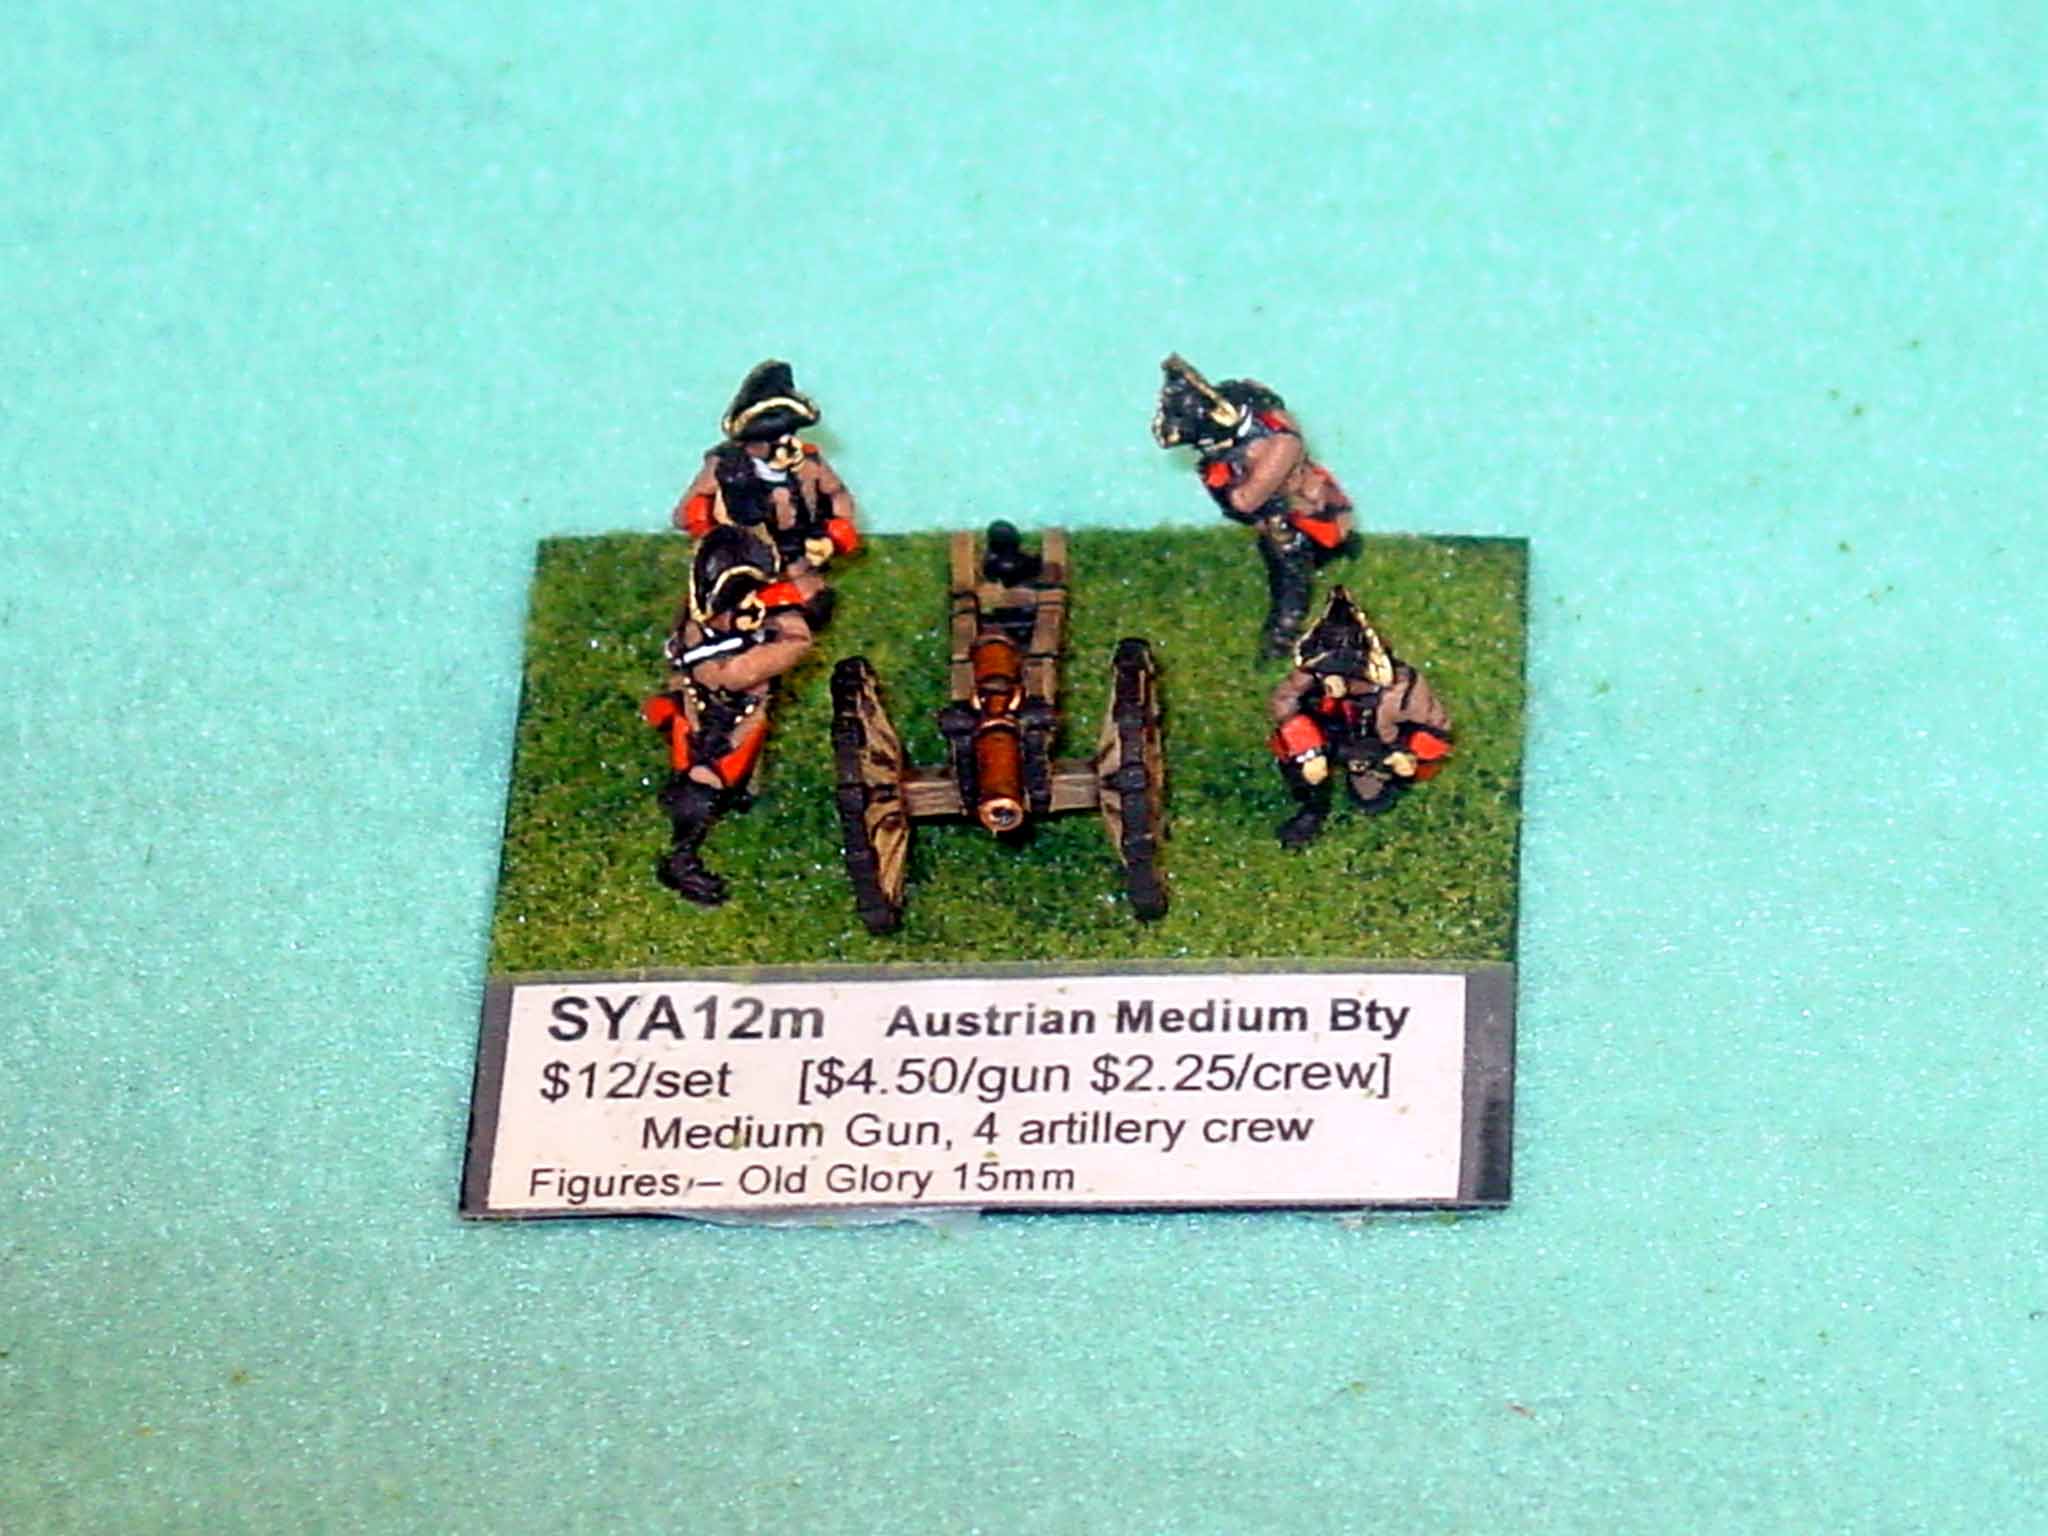 GAJO 15mm SYW figures